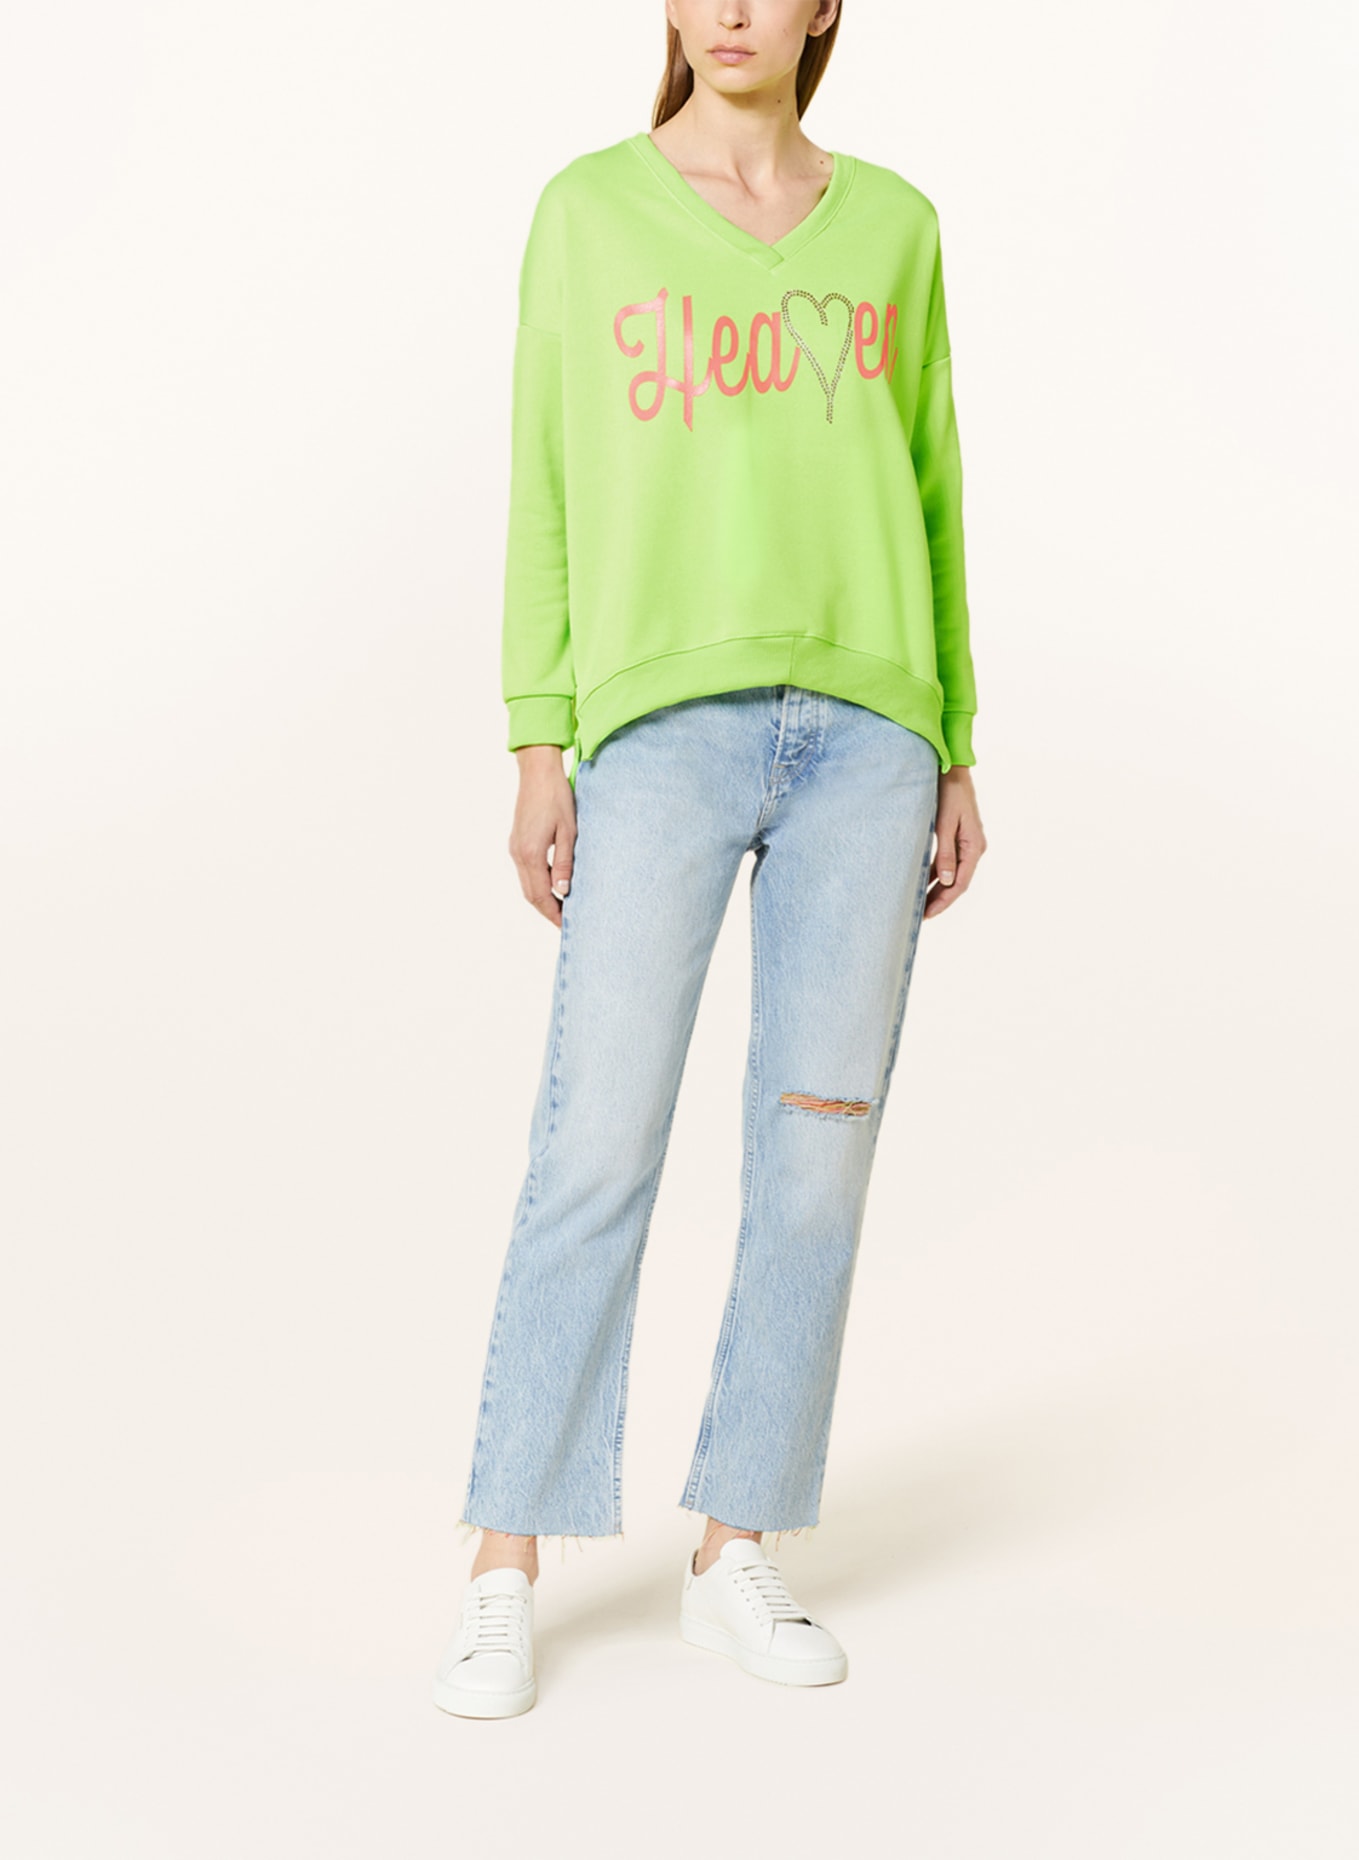 miss goodlife Sweatshirt HEAVEN STONE with decorative gems, Color: NEON GREEN/ PINK (Image 2)